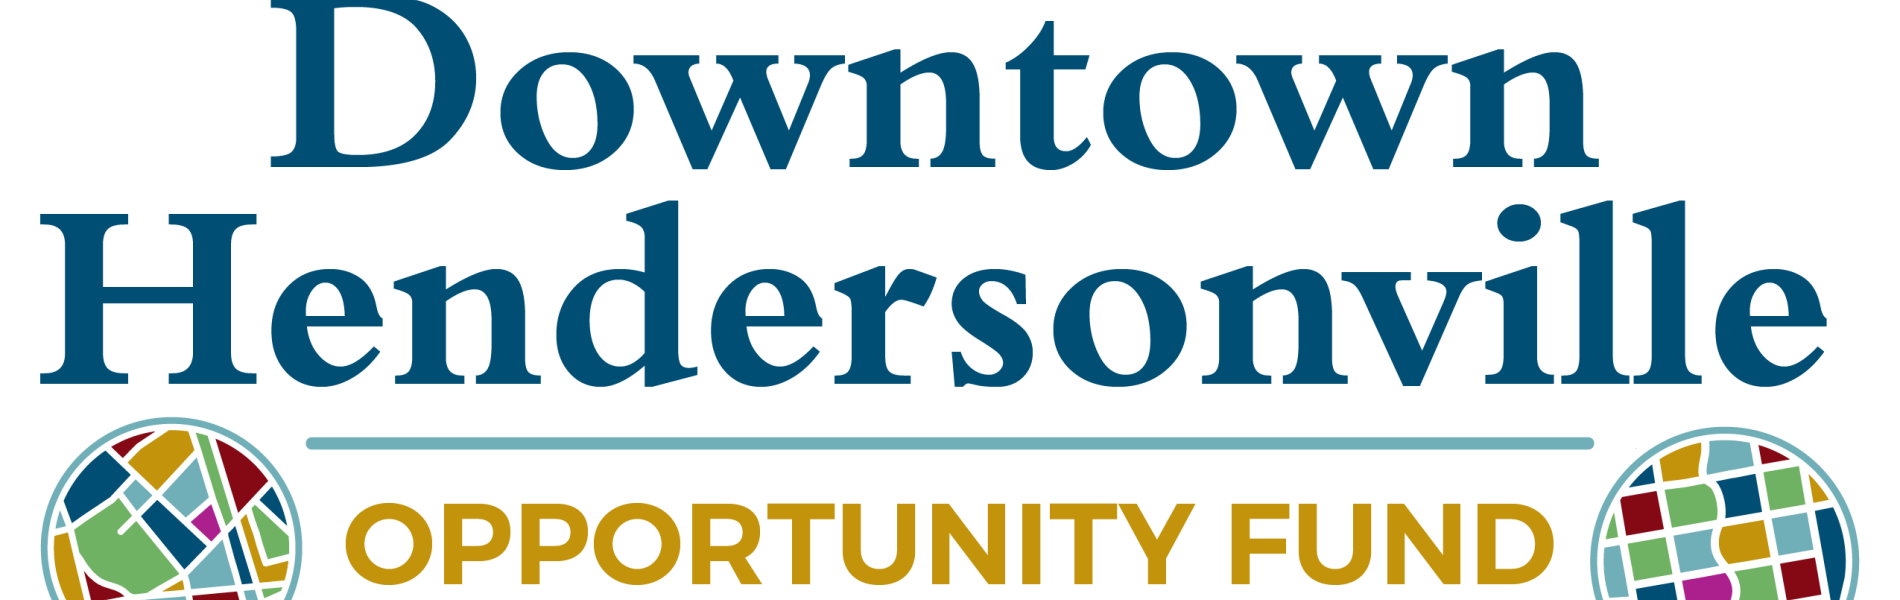 downtown opportunity fund logo